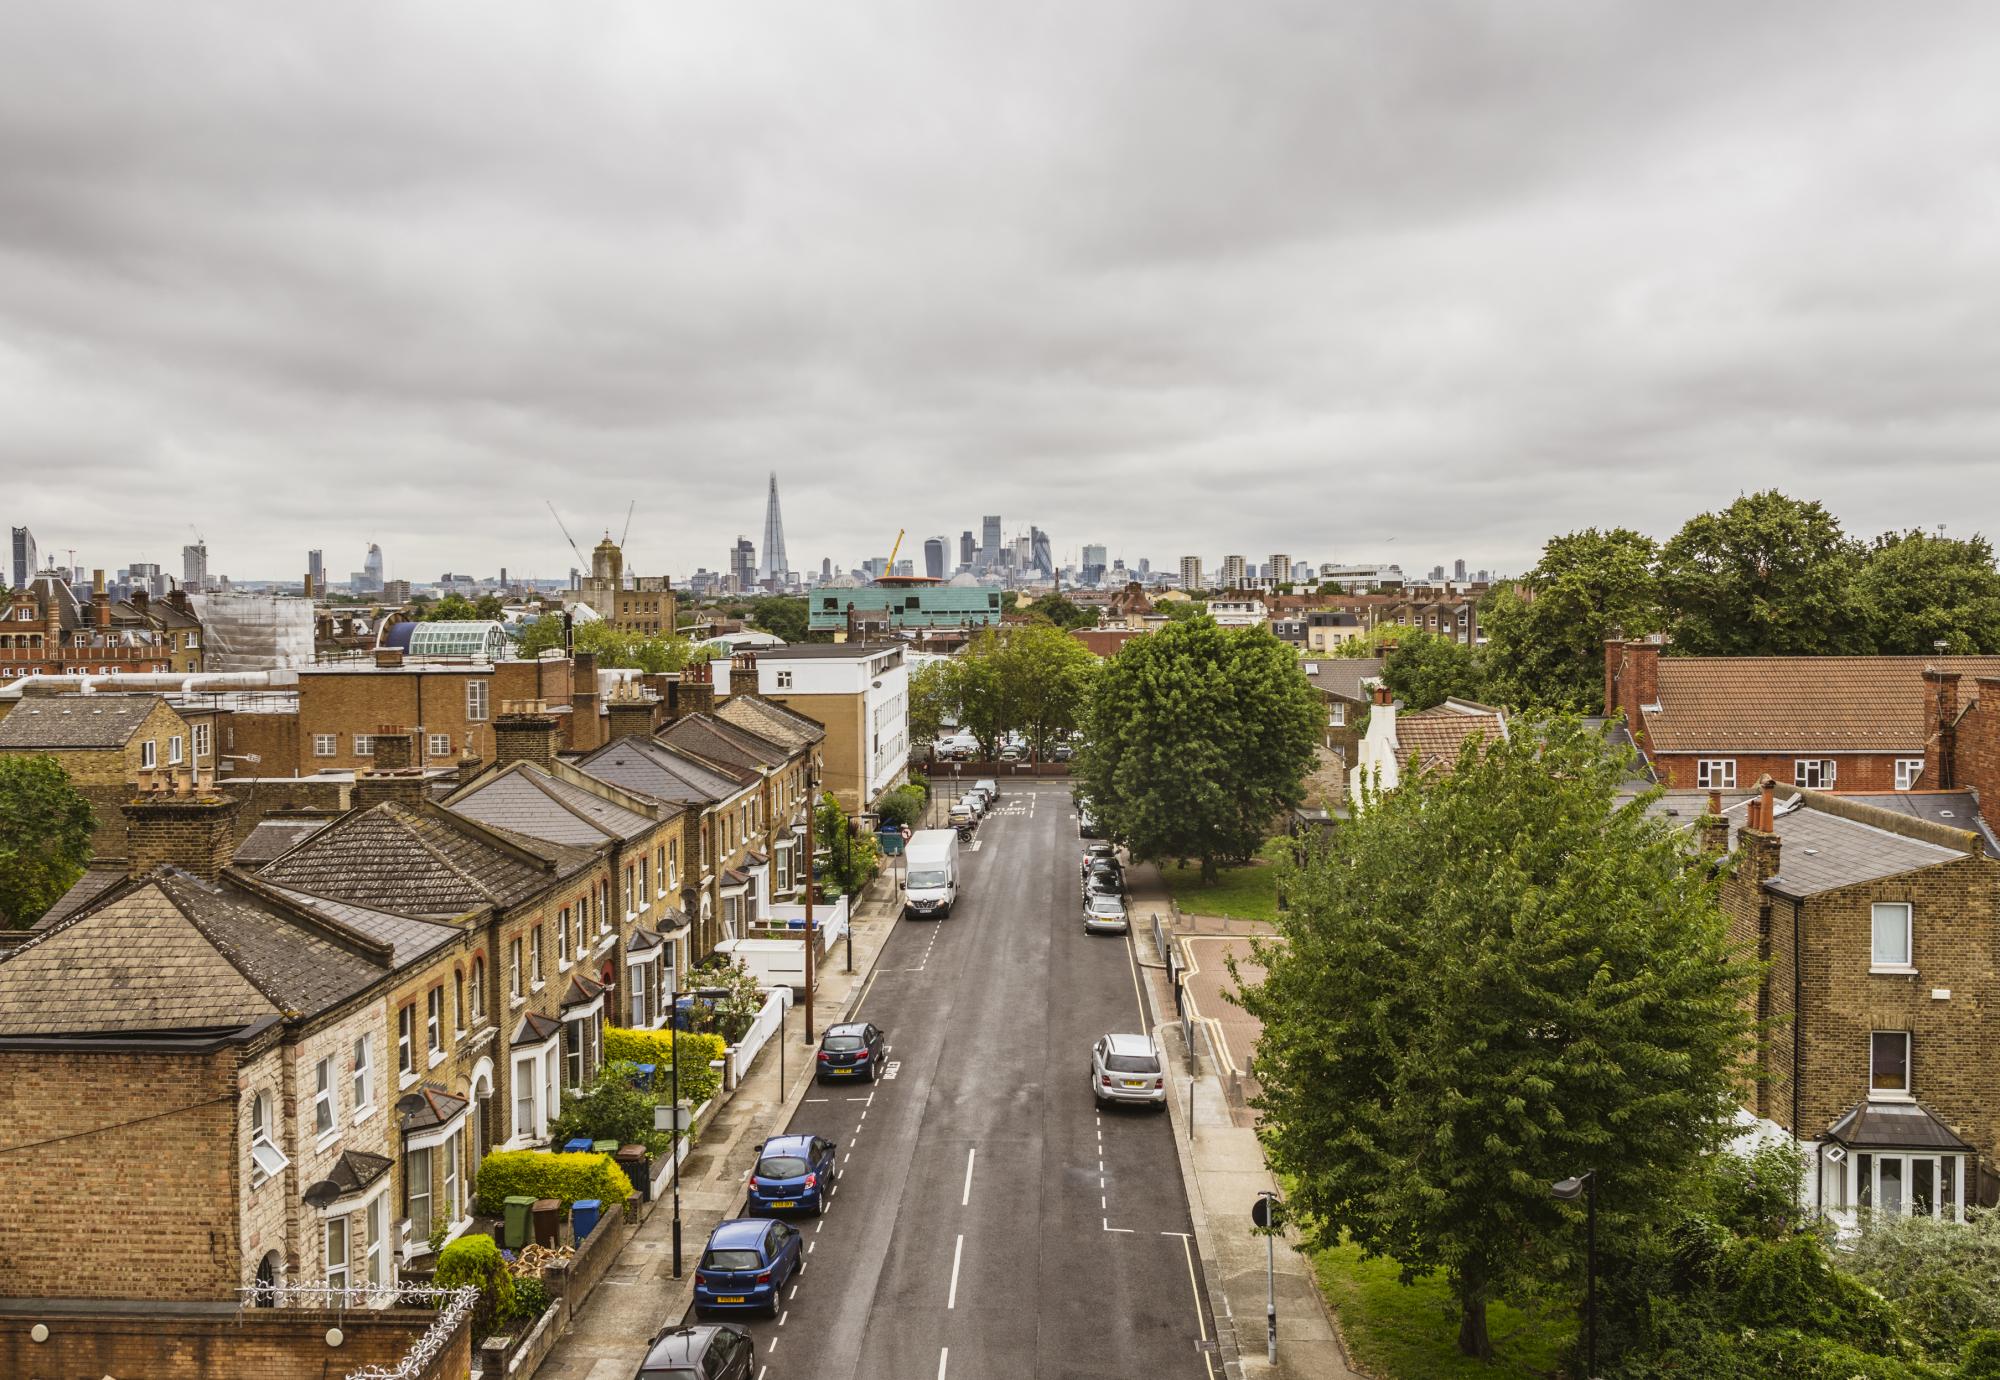 Peckham street with residential housing and the city skyline with skyscrapers on the horizon.